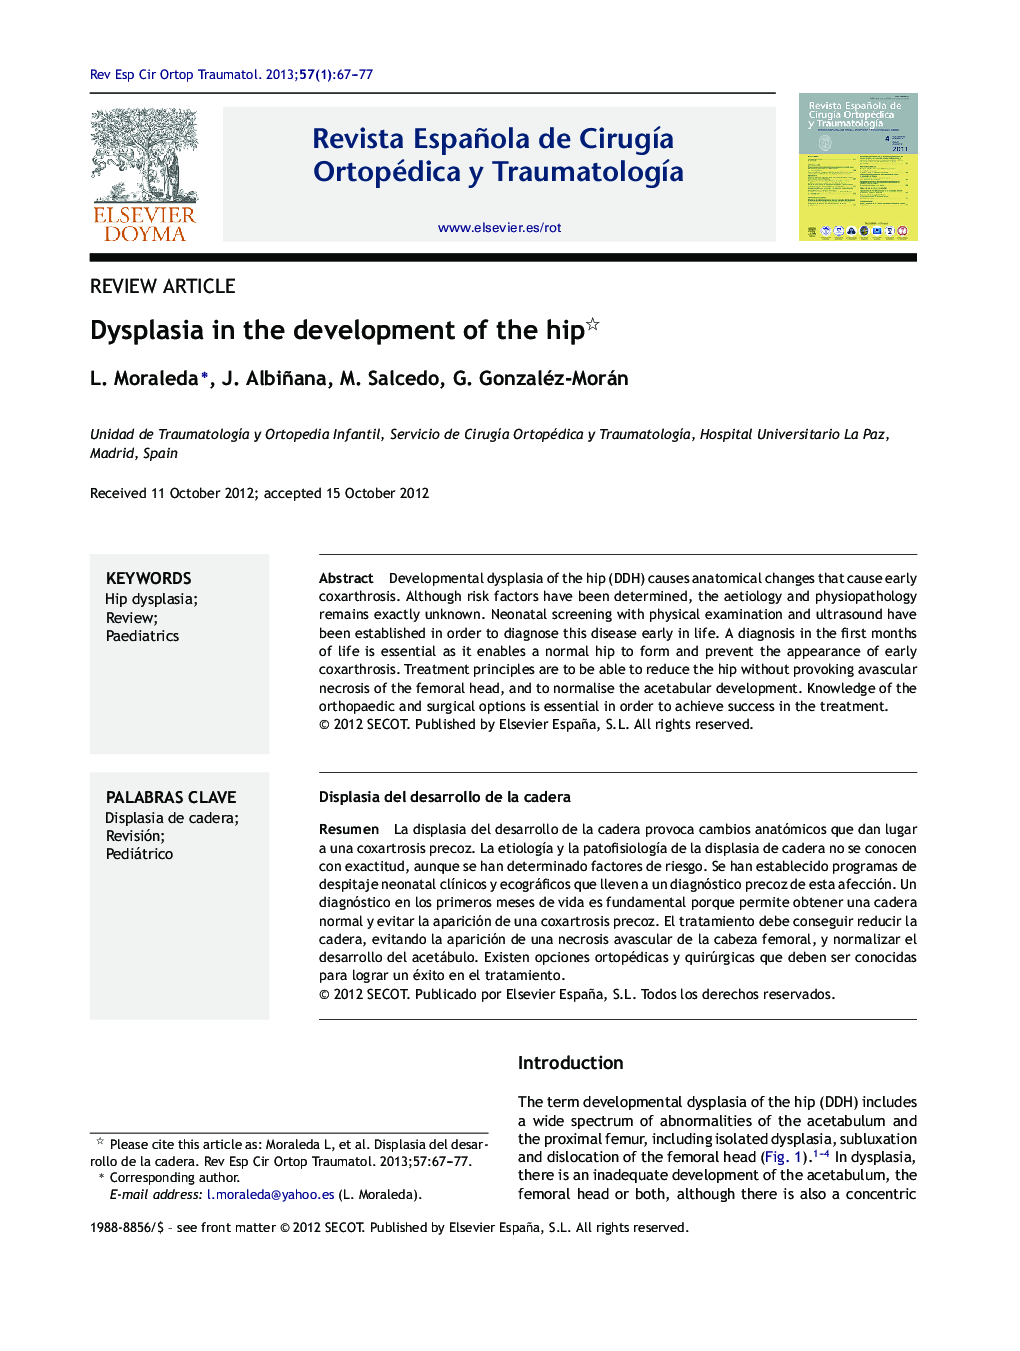 Dysplasia in the development of the hip 